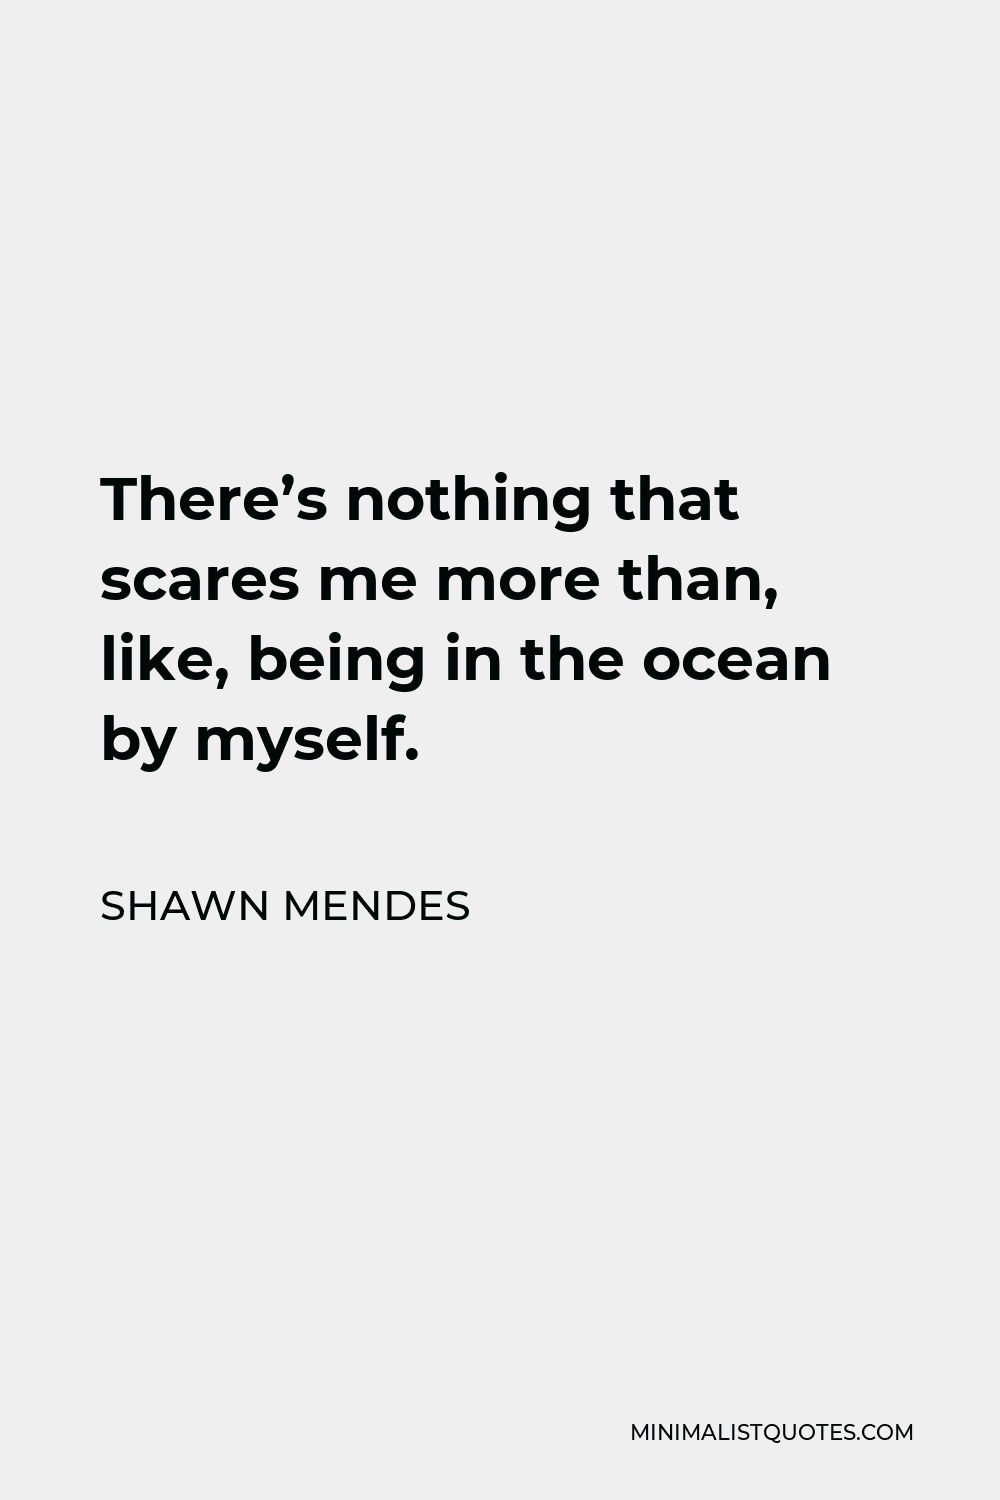 Shawn Mendes Quote - There’s nothing that scares me more than, like, being in the ocean by myself.